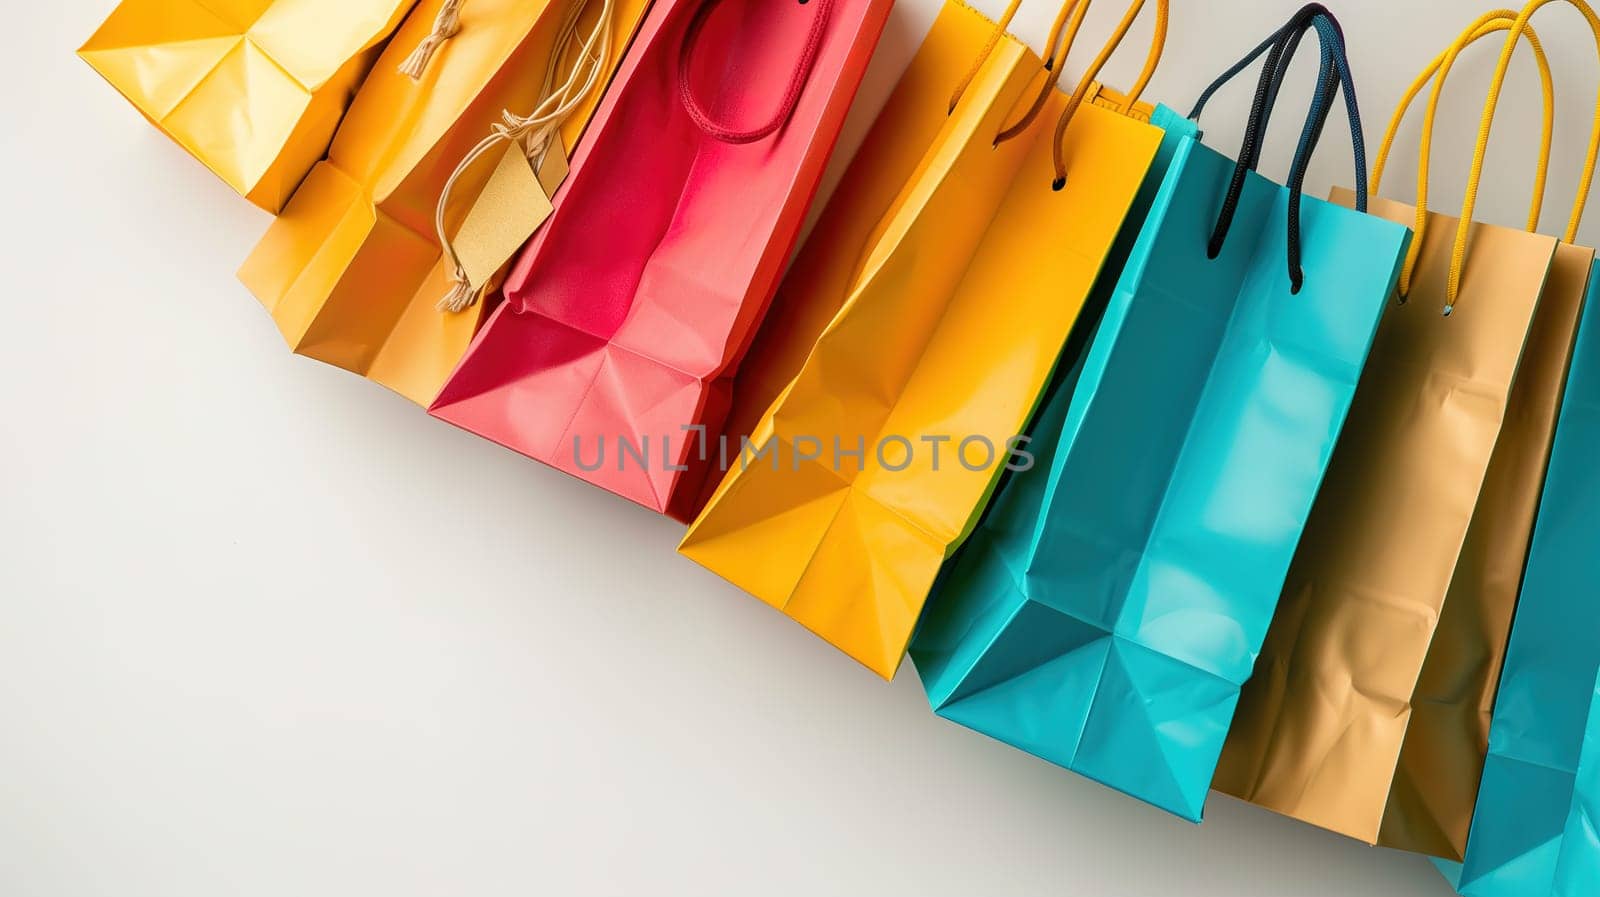 Row of Colorful Shopping Bags Hanging on Wall by TRMK